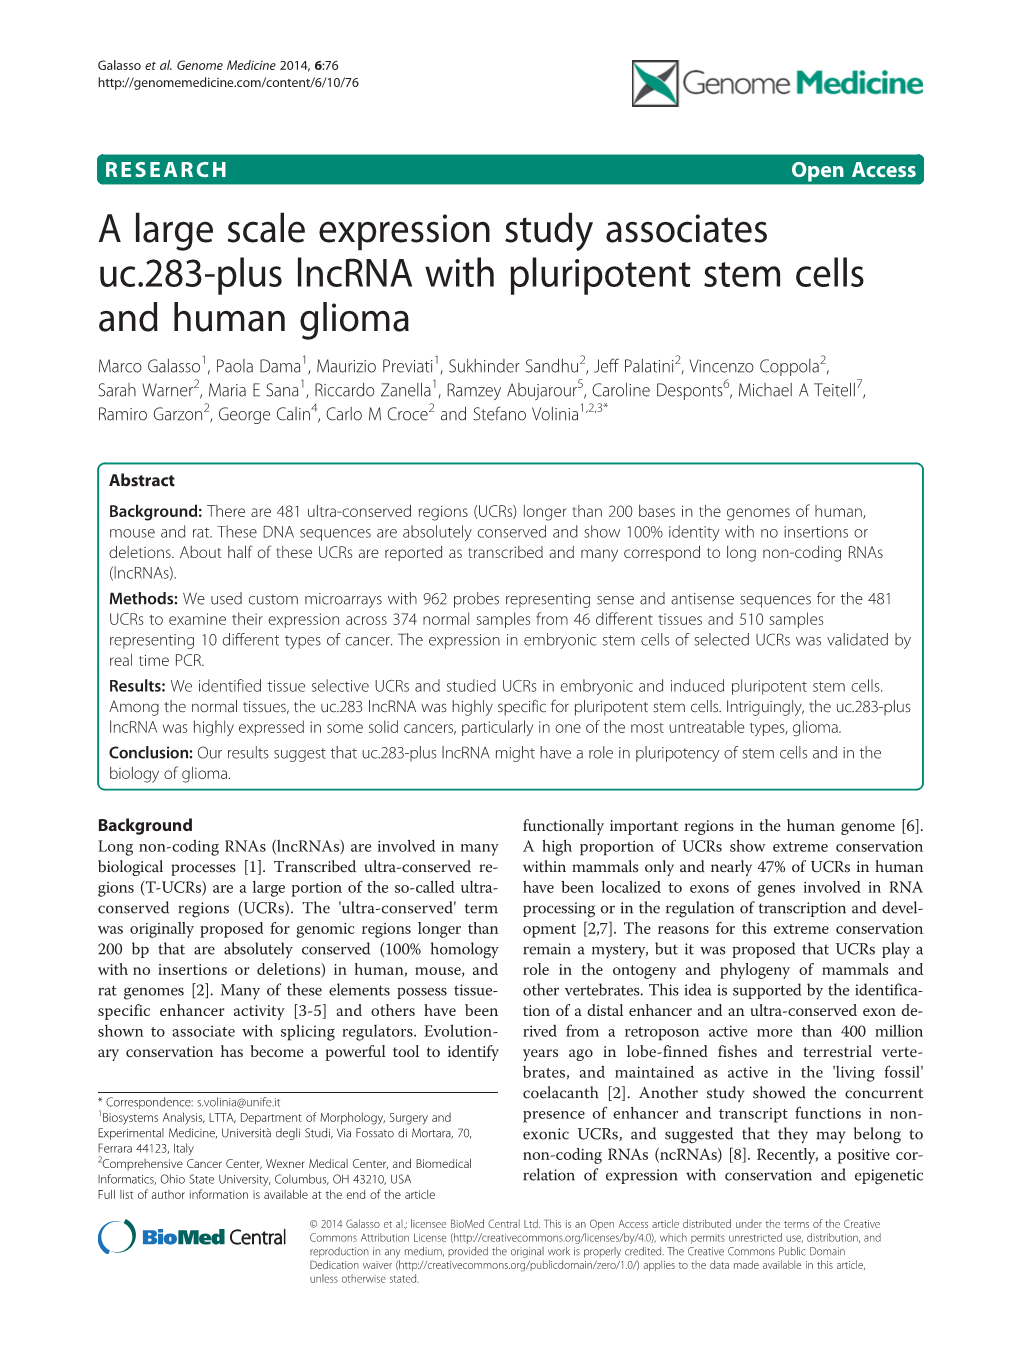 A Large Scale Expression Study Associates Uc